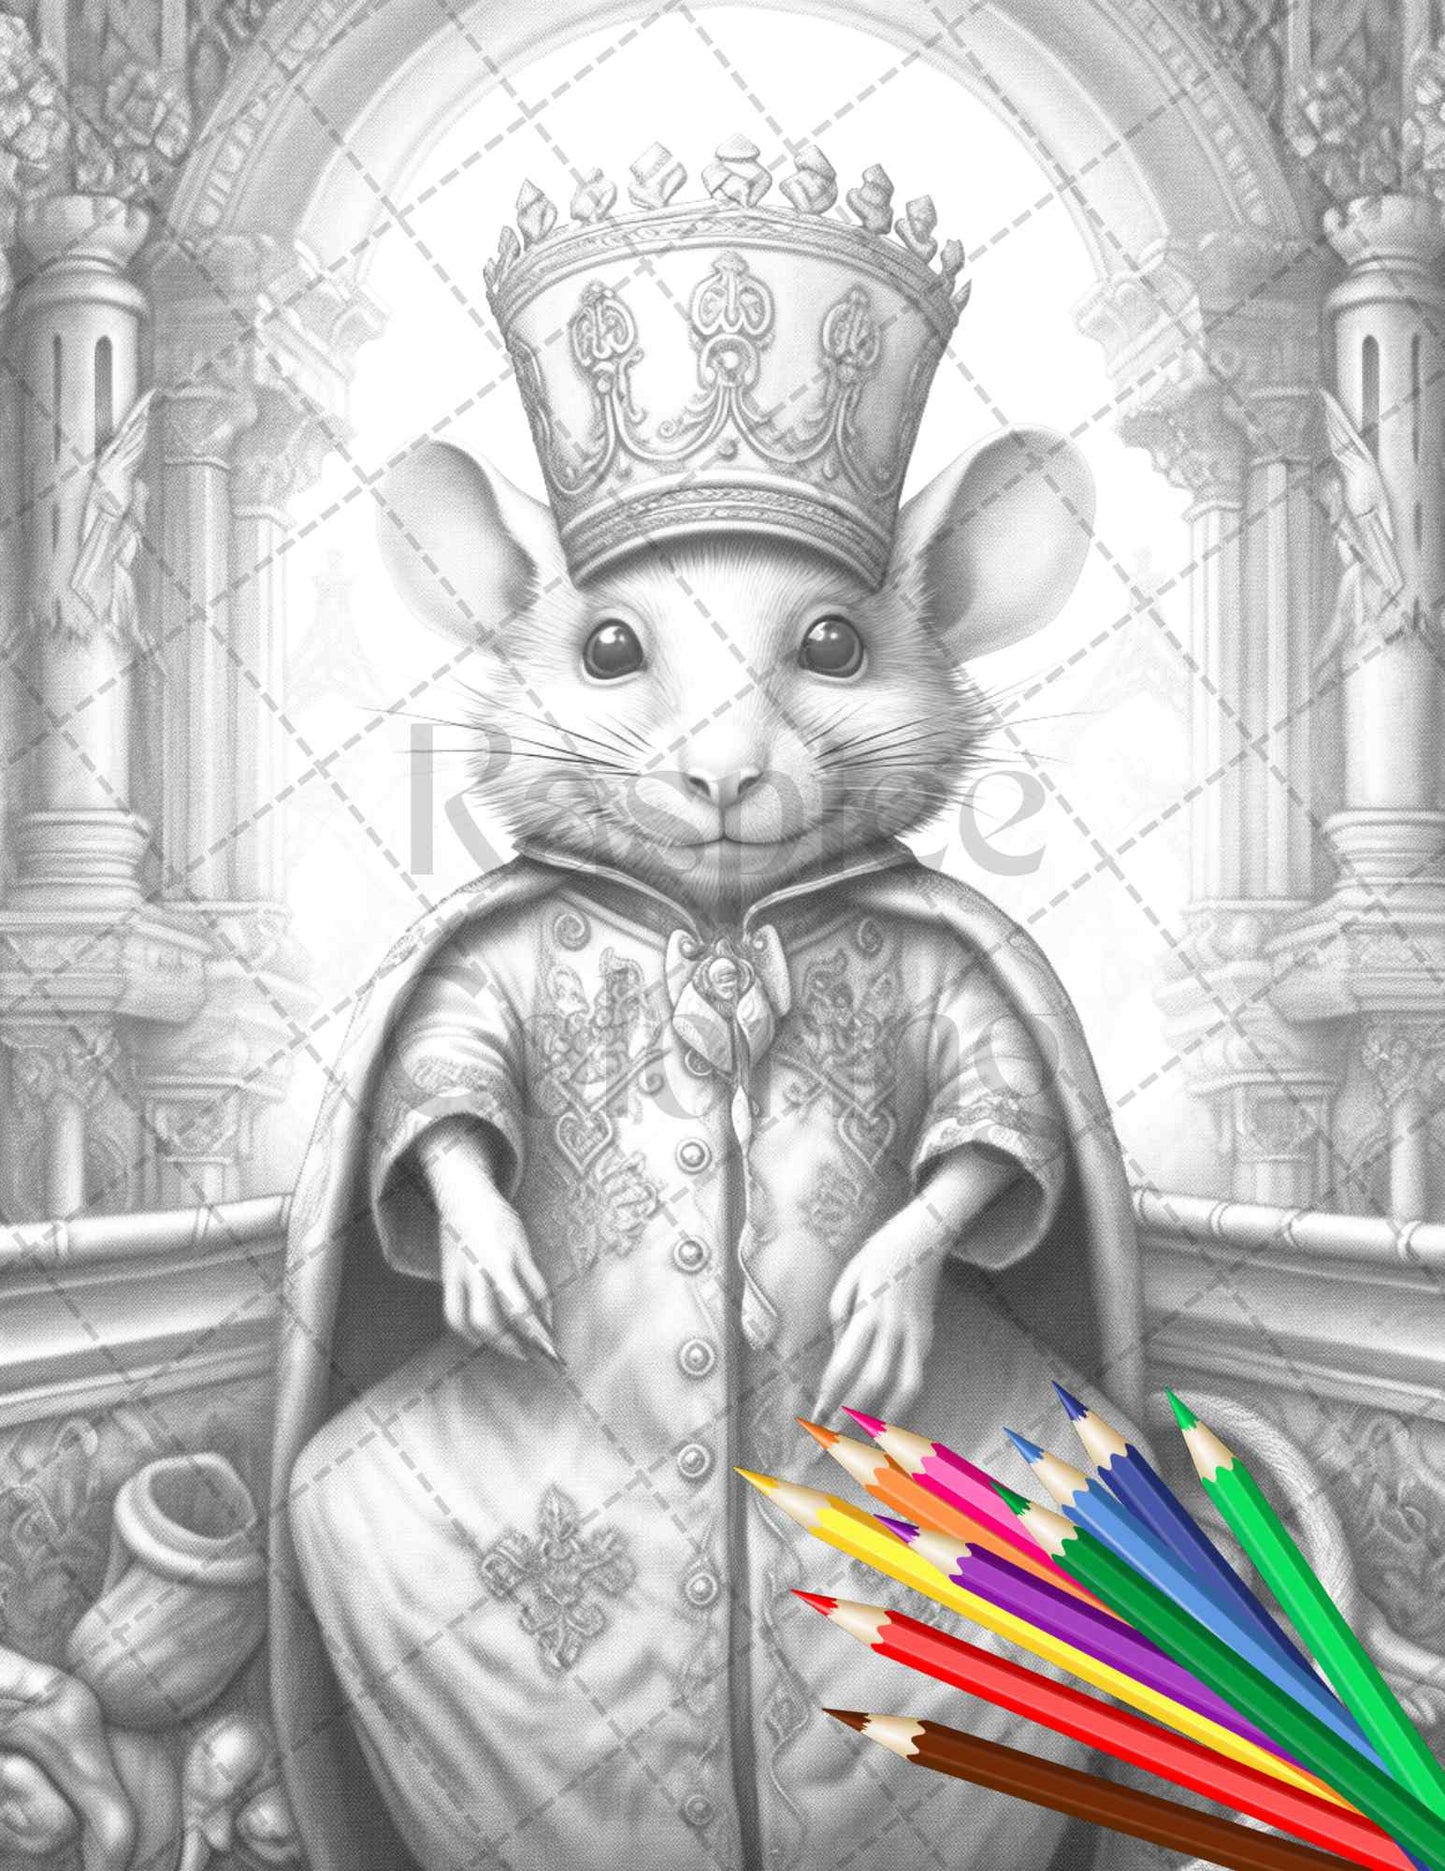 40 Little Mouse Prince Grayscale Coloring Pages Printable for Adults, PDF File Instant Download - raspiee